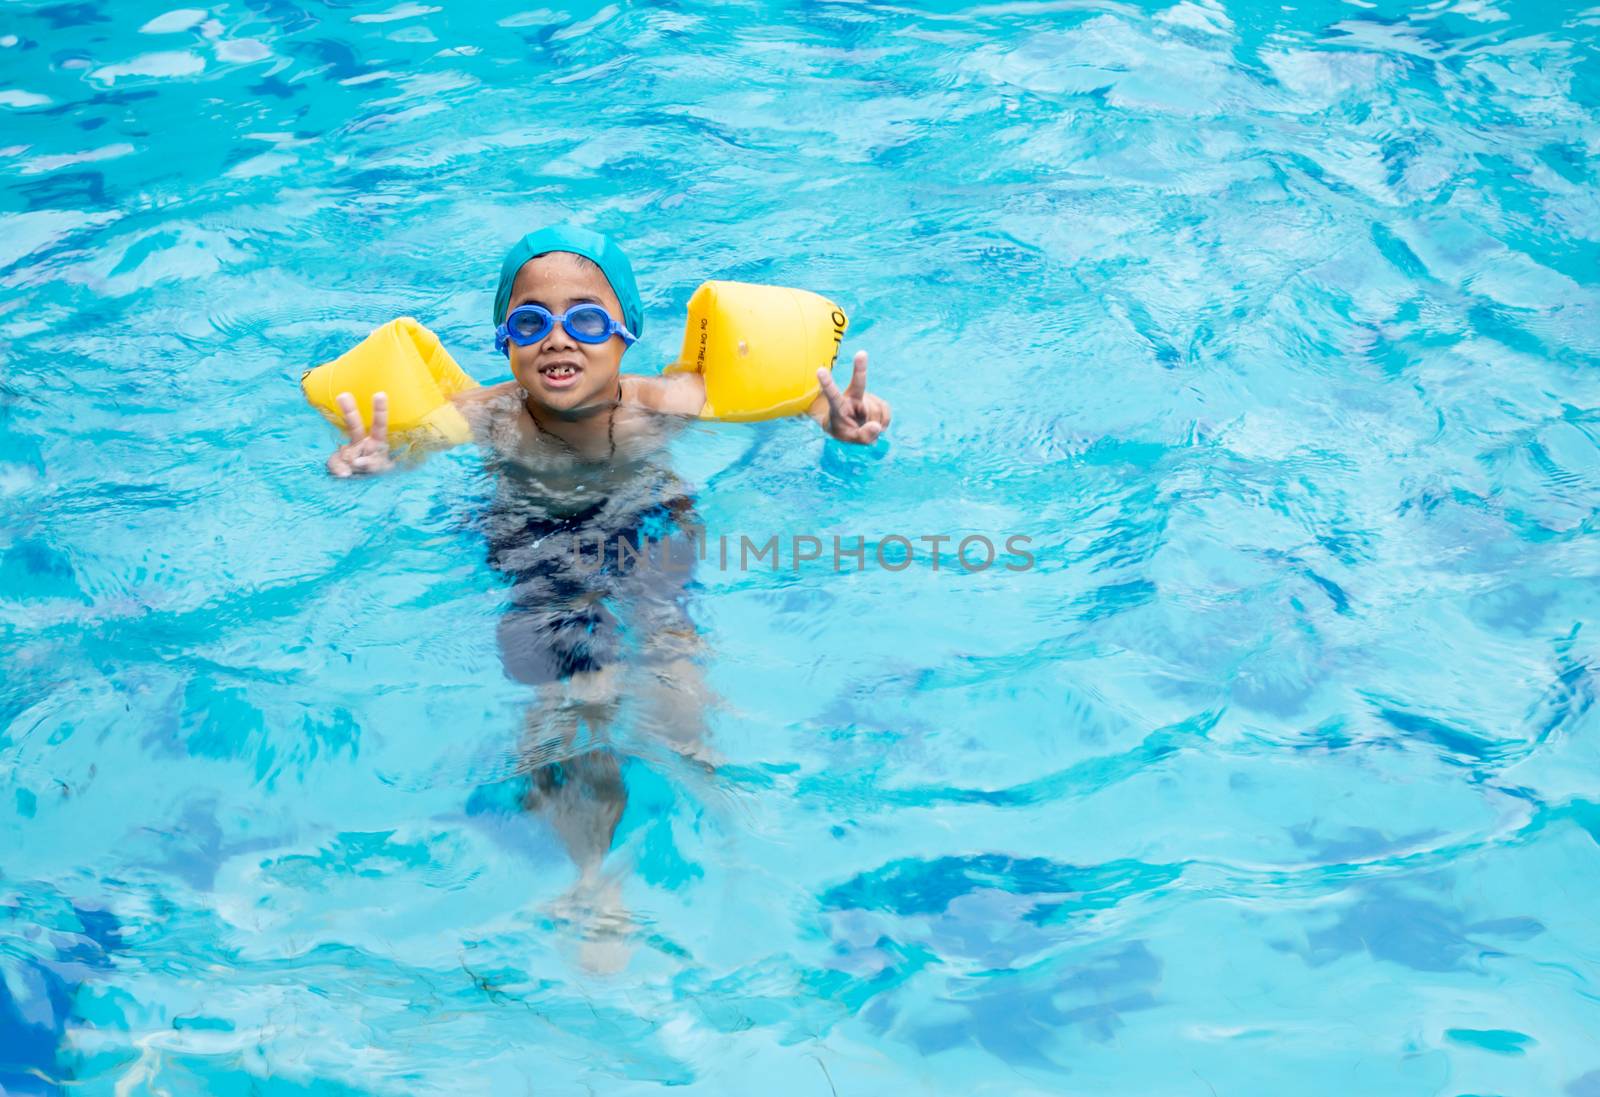 Boy practicing swimming in the pool by Unimages2527